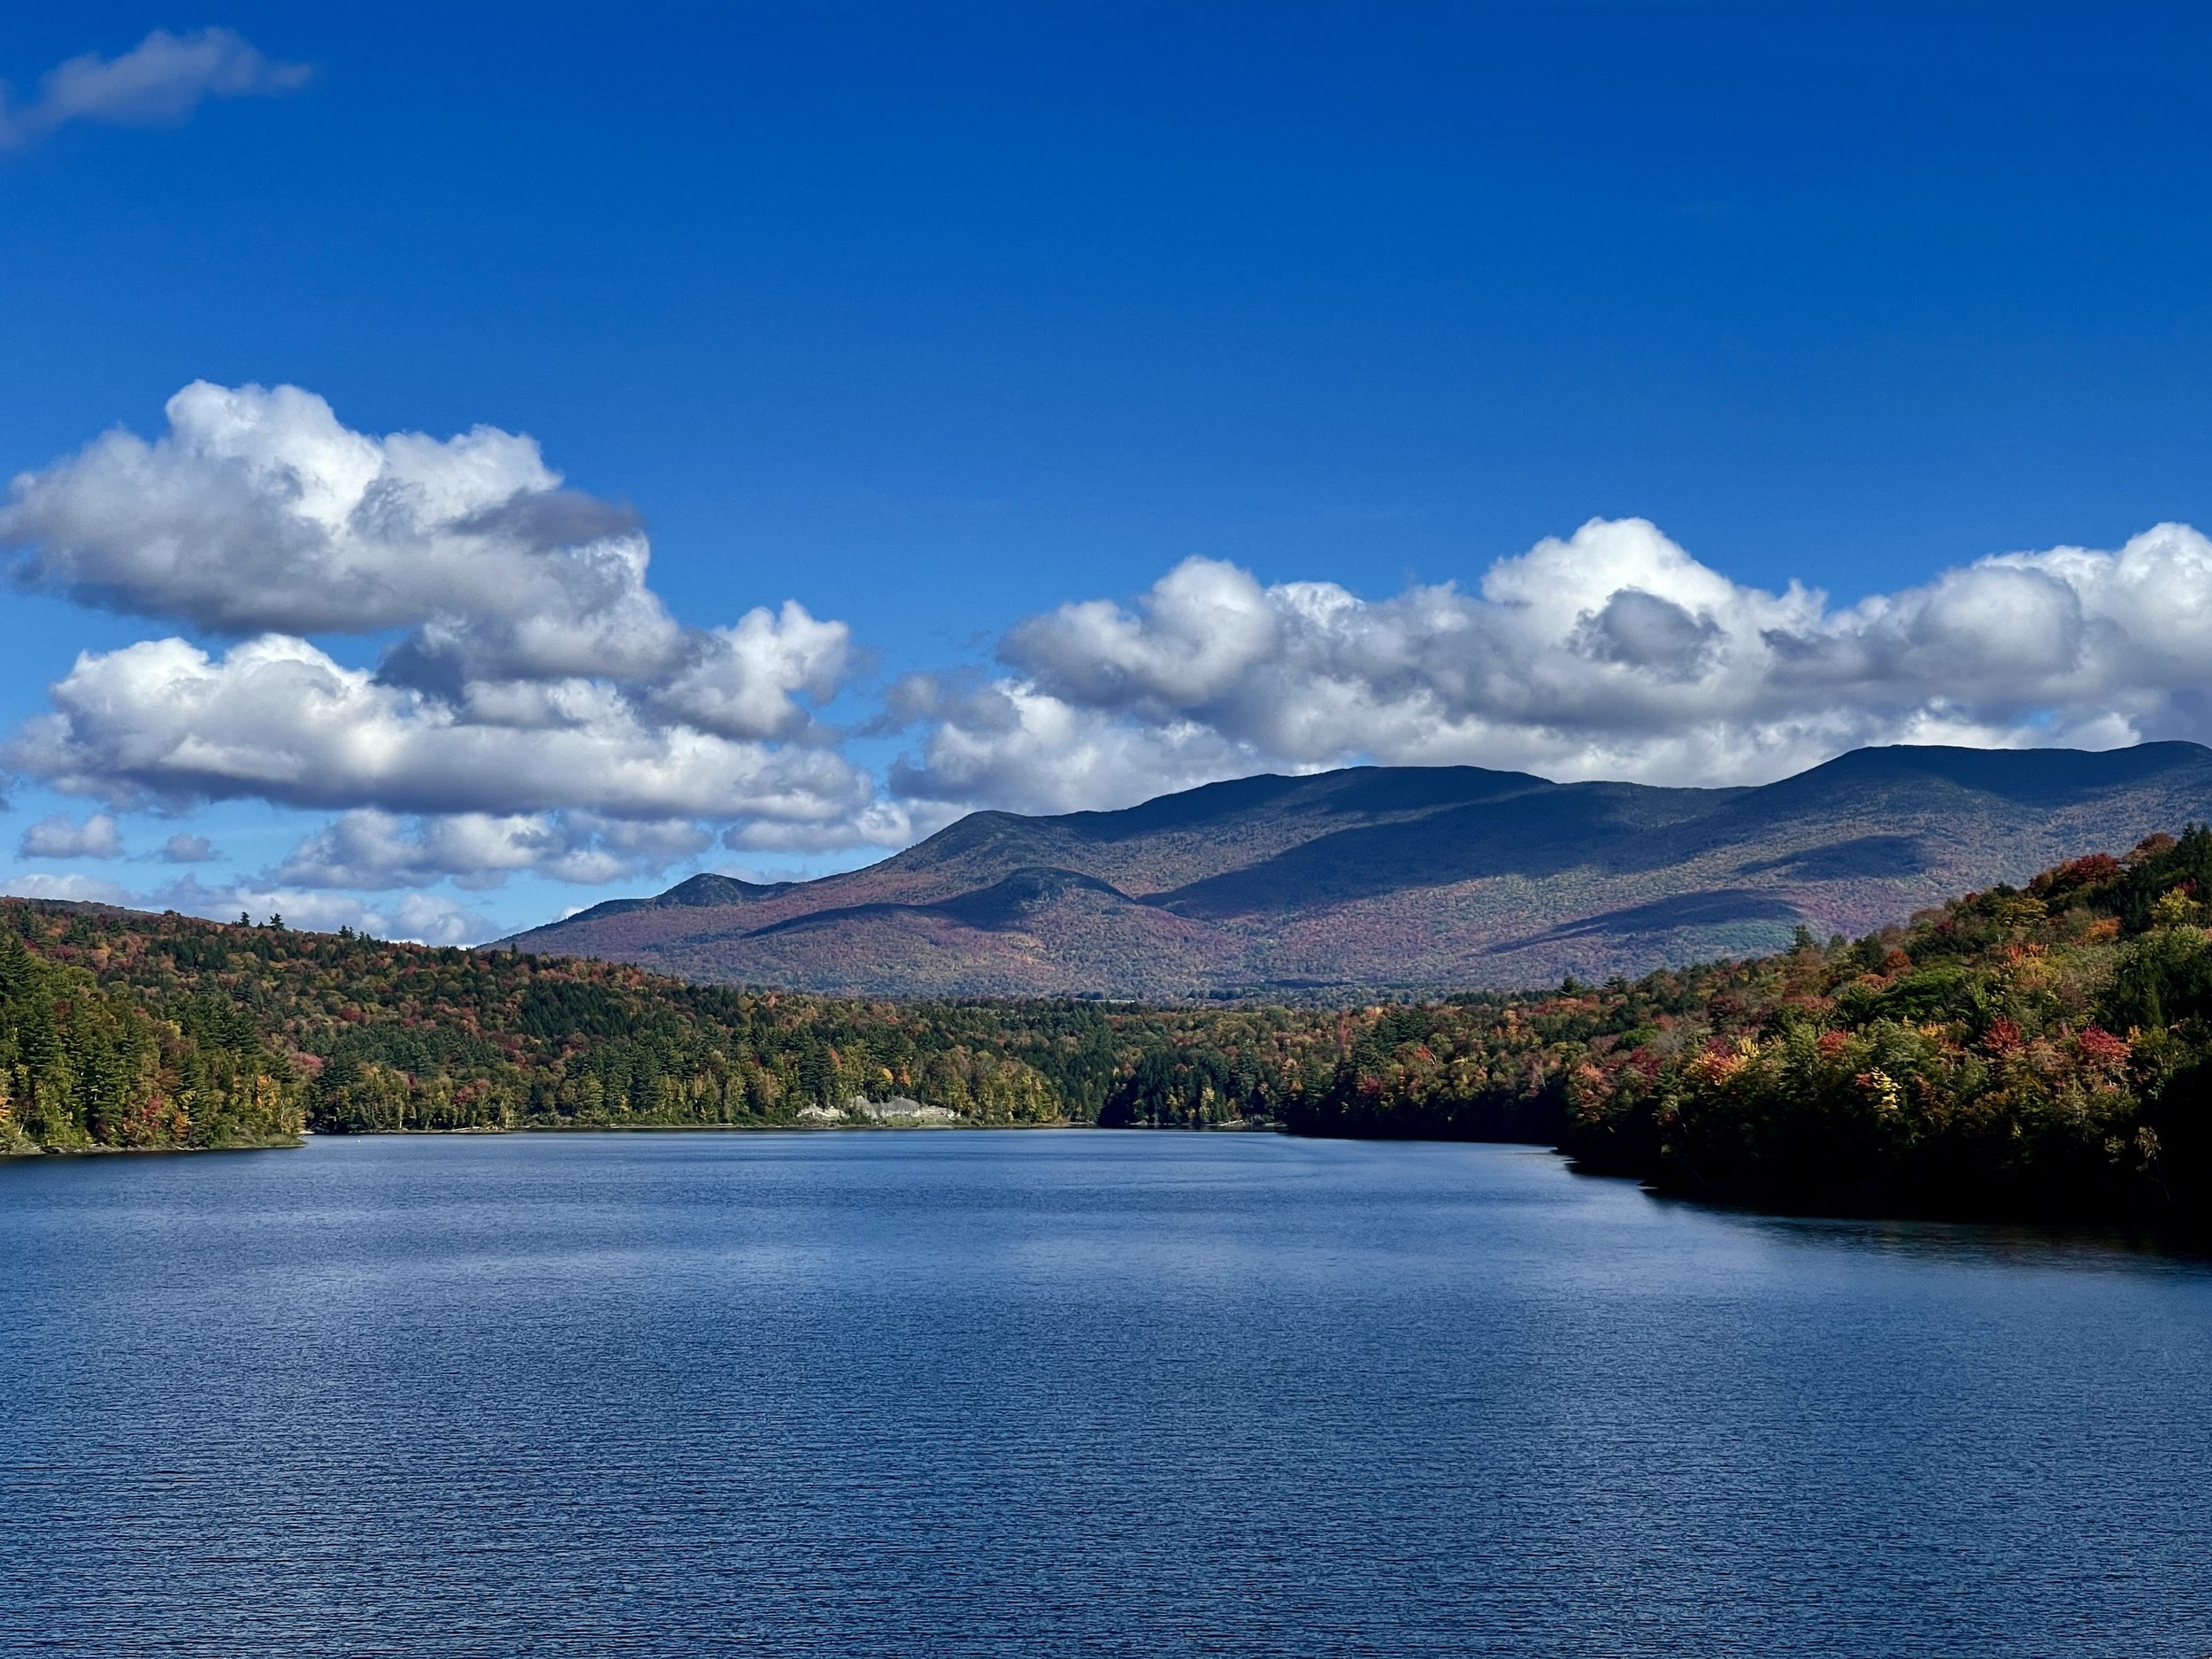   No filters. Just a perfect autumn day at the Waterbury Reservoir. Photo by Michael Paddock  